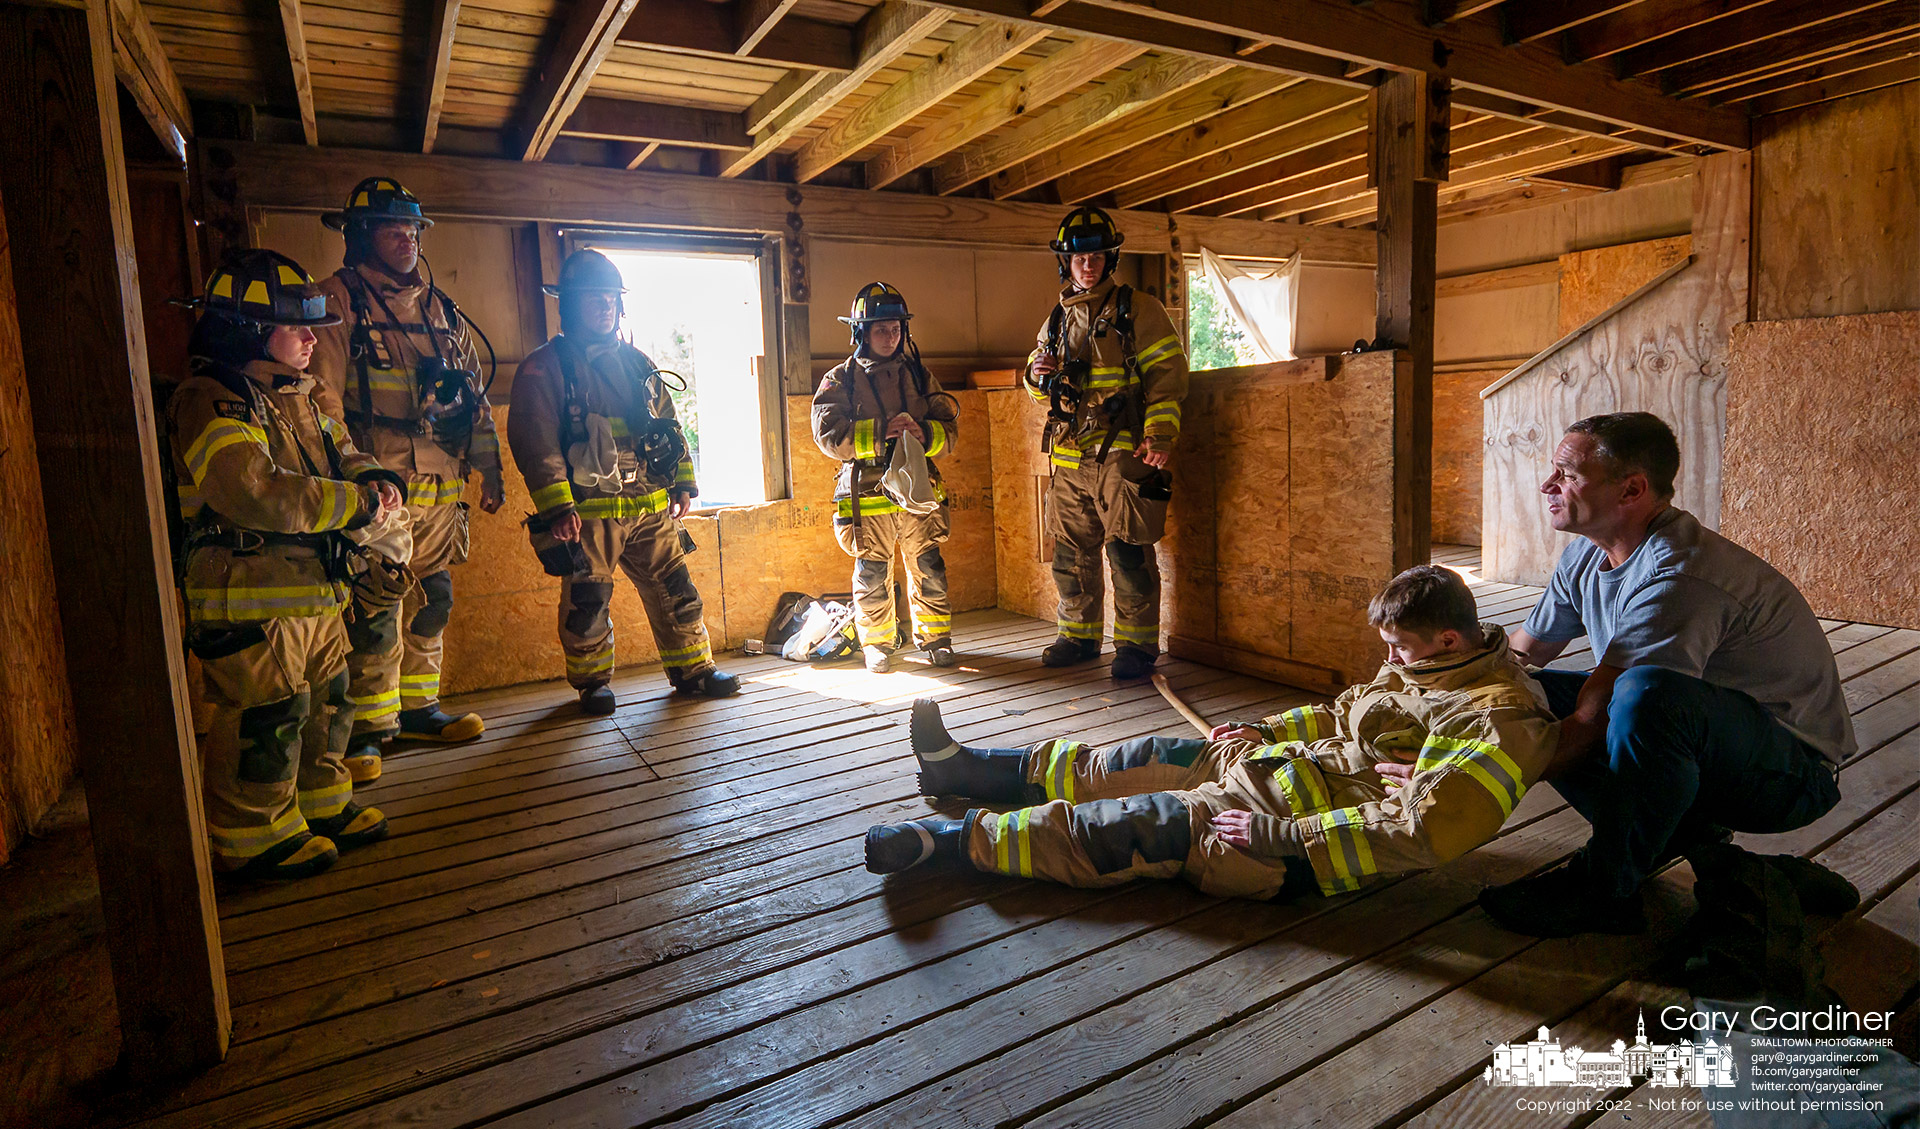 Firefighter trainees receive lessons in rescuing an unconscious person from the second floor of a burning building during a class at the Westerville Fire Department training building on West Main Street. My Final Photo for Sept. 14, 2022.